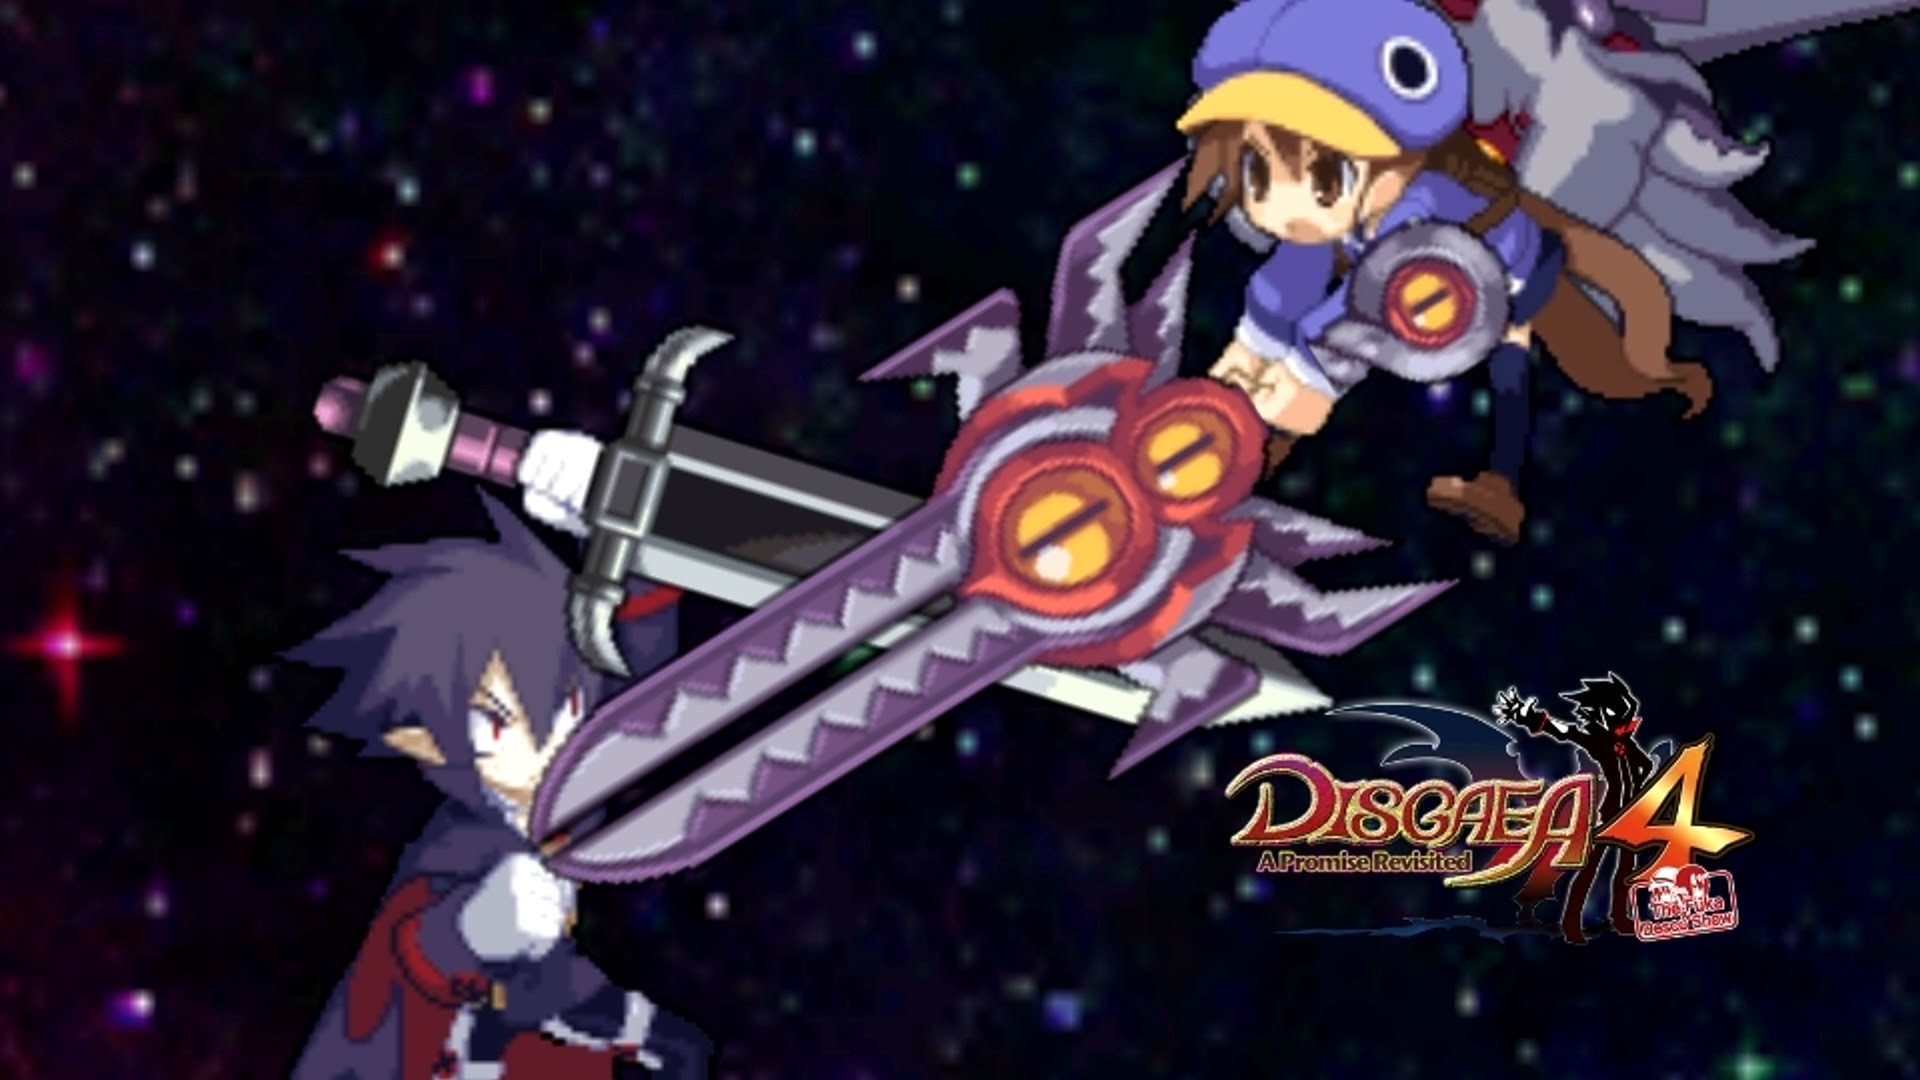 1920x1080 Prinny Disgaea Wallpapers by Michael Ibarra #8